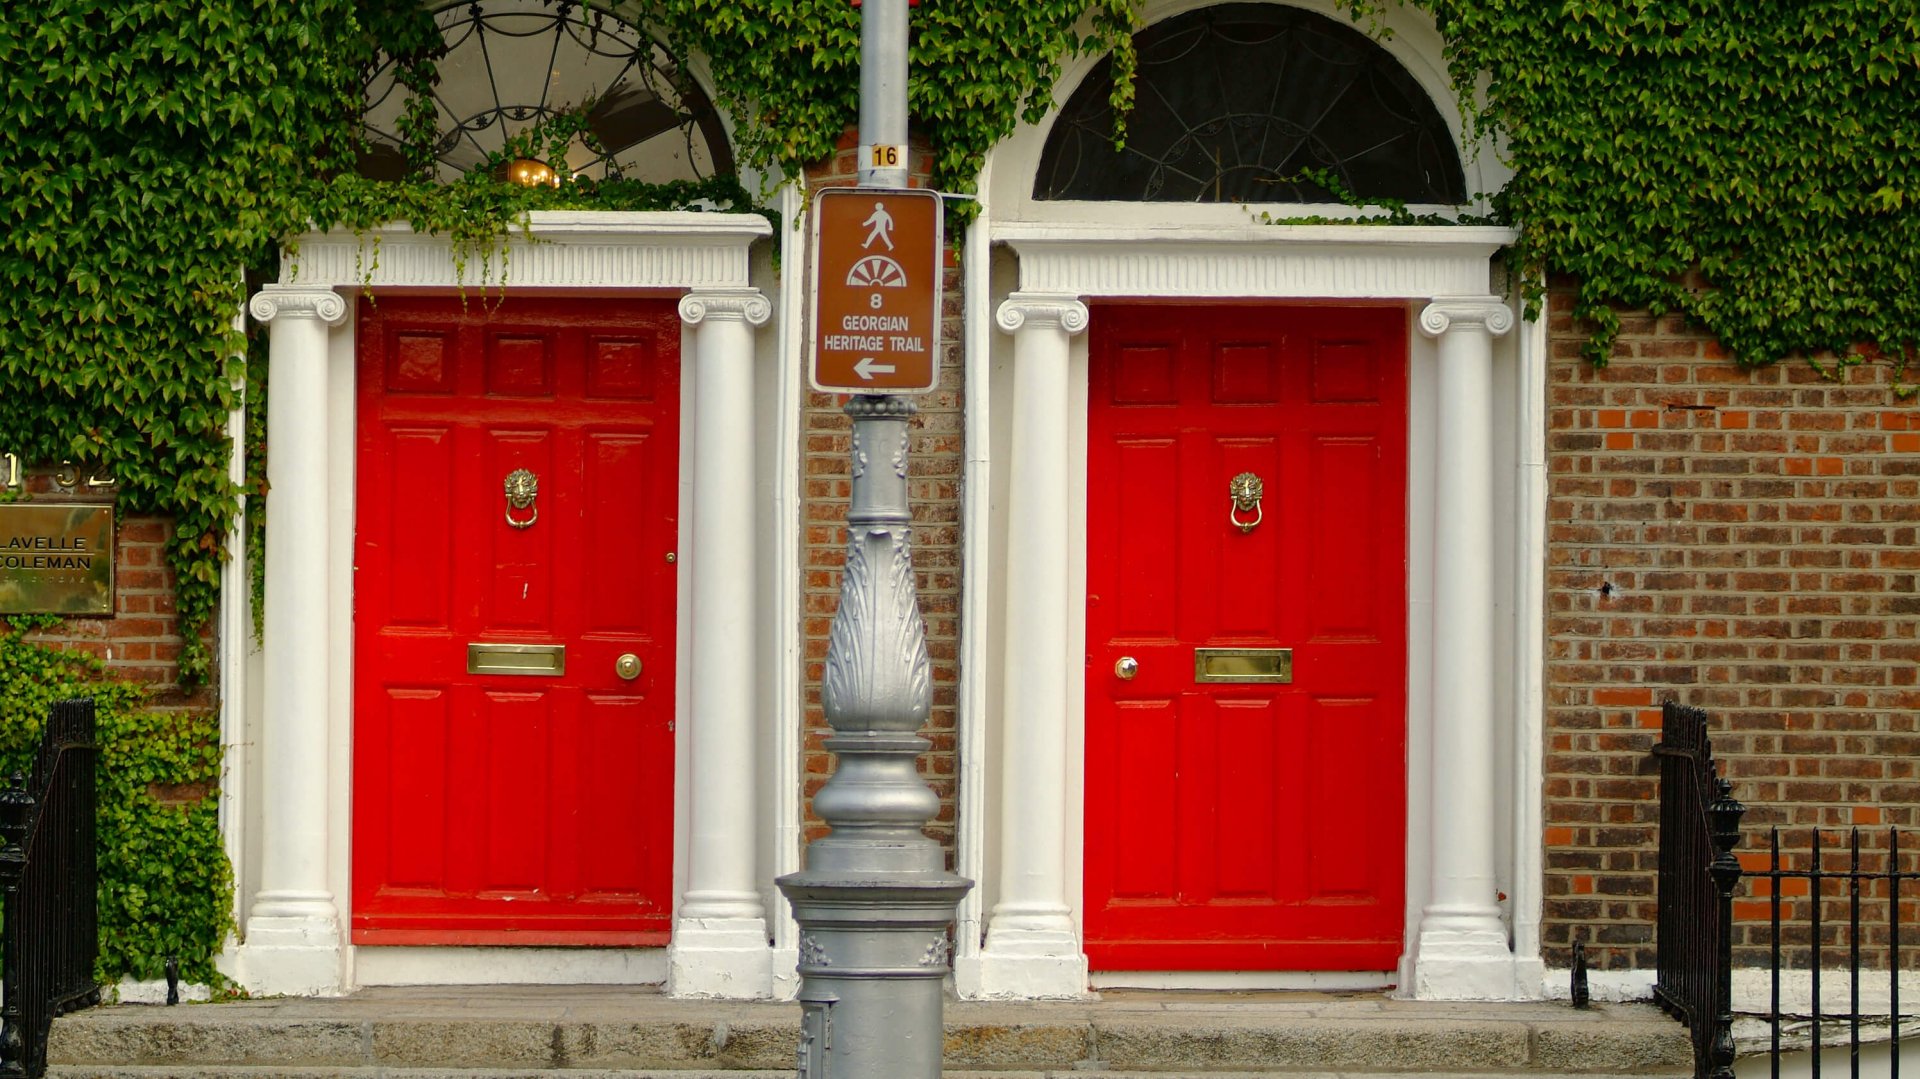 Two Georgian red doors in Dublin beautifully covered in Ivy